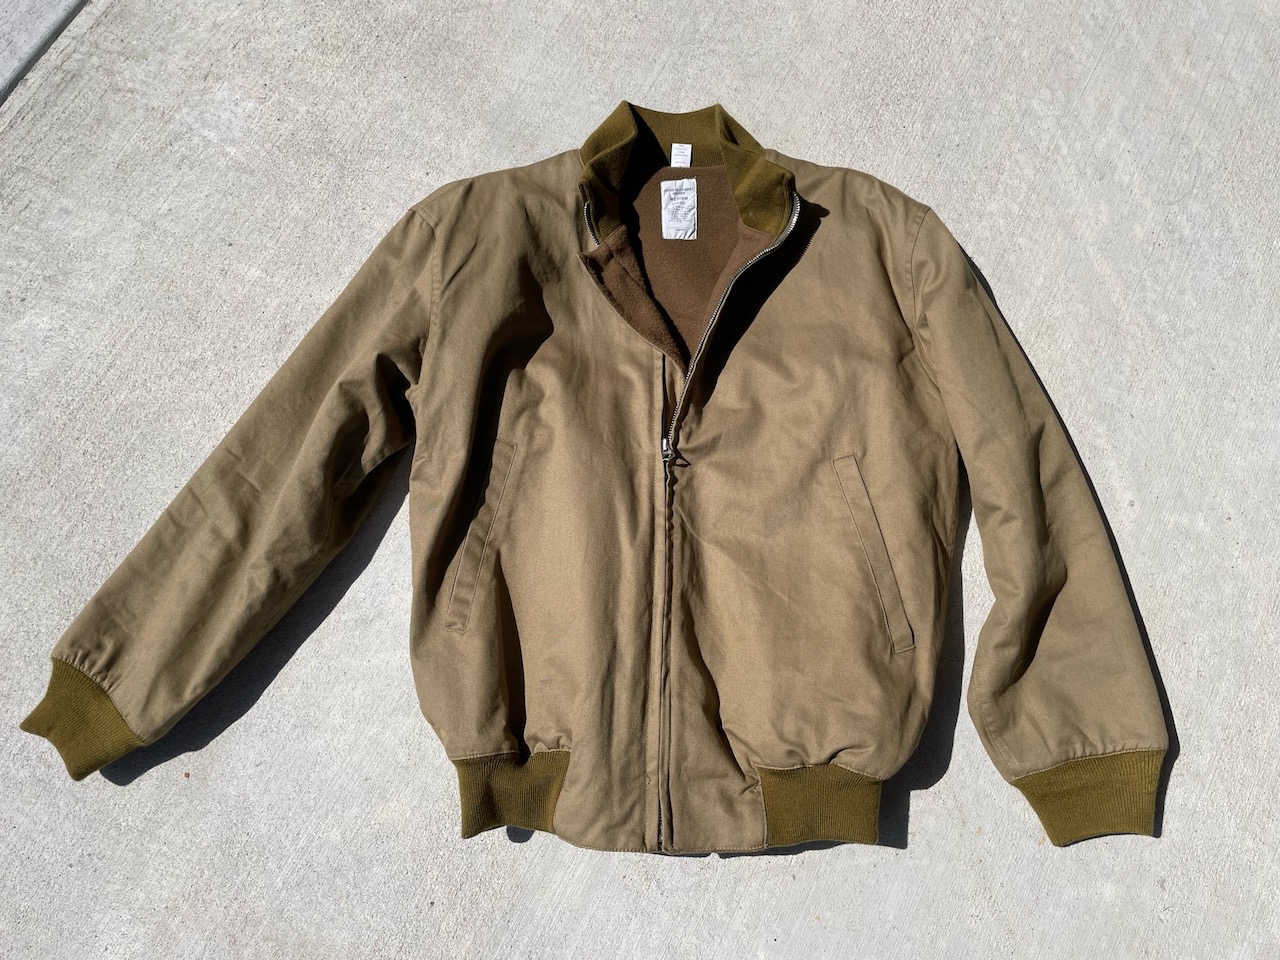 For Sale - At The Front Fleece Lined Tanker Jacket Size Medium (23 3/4 ...